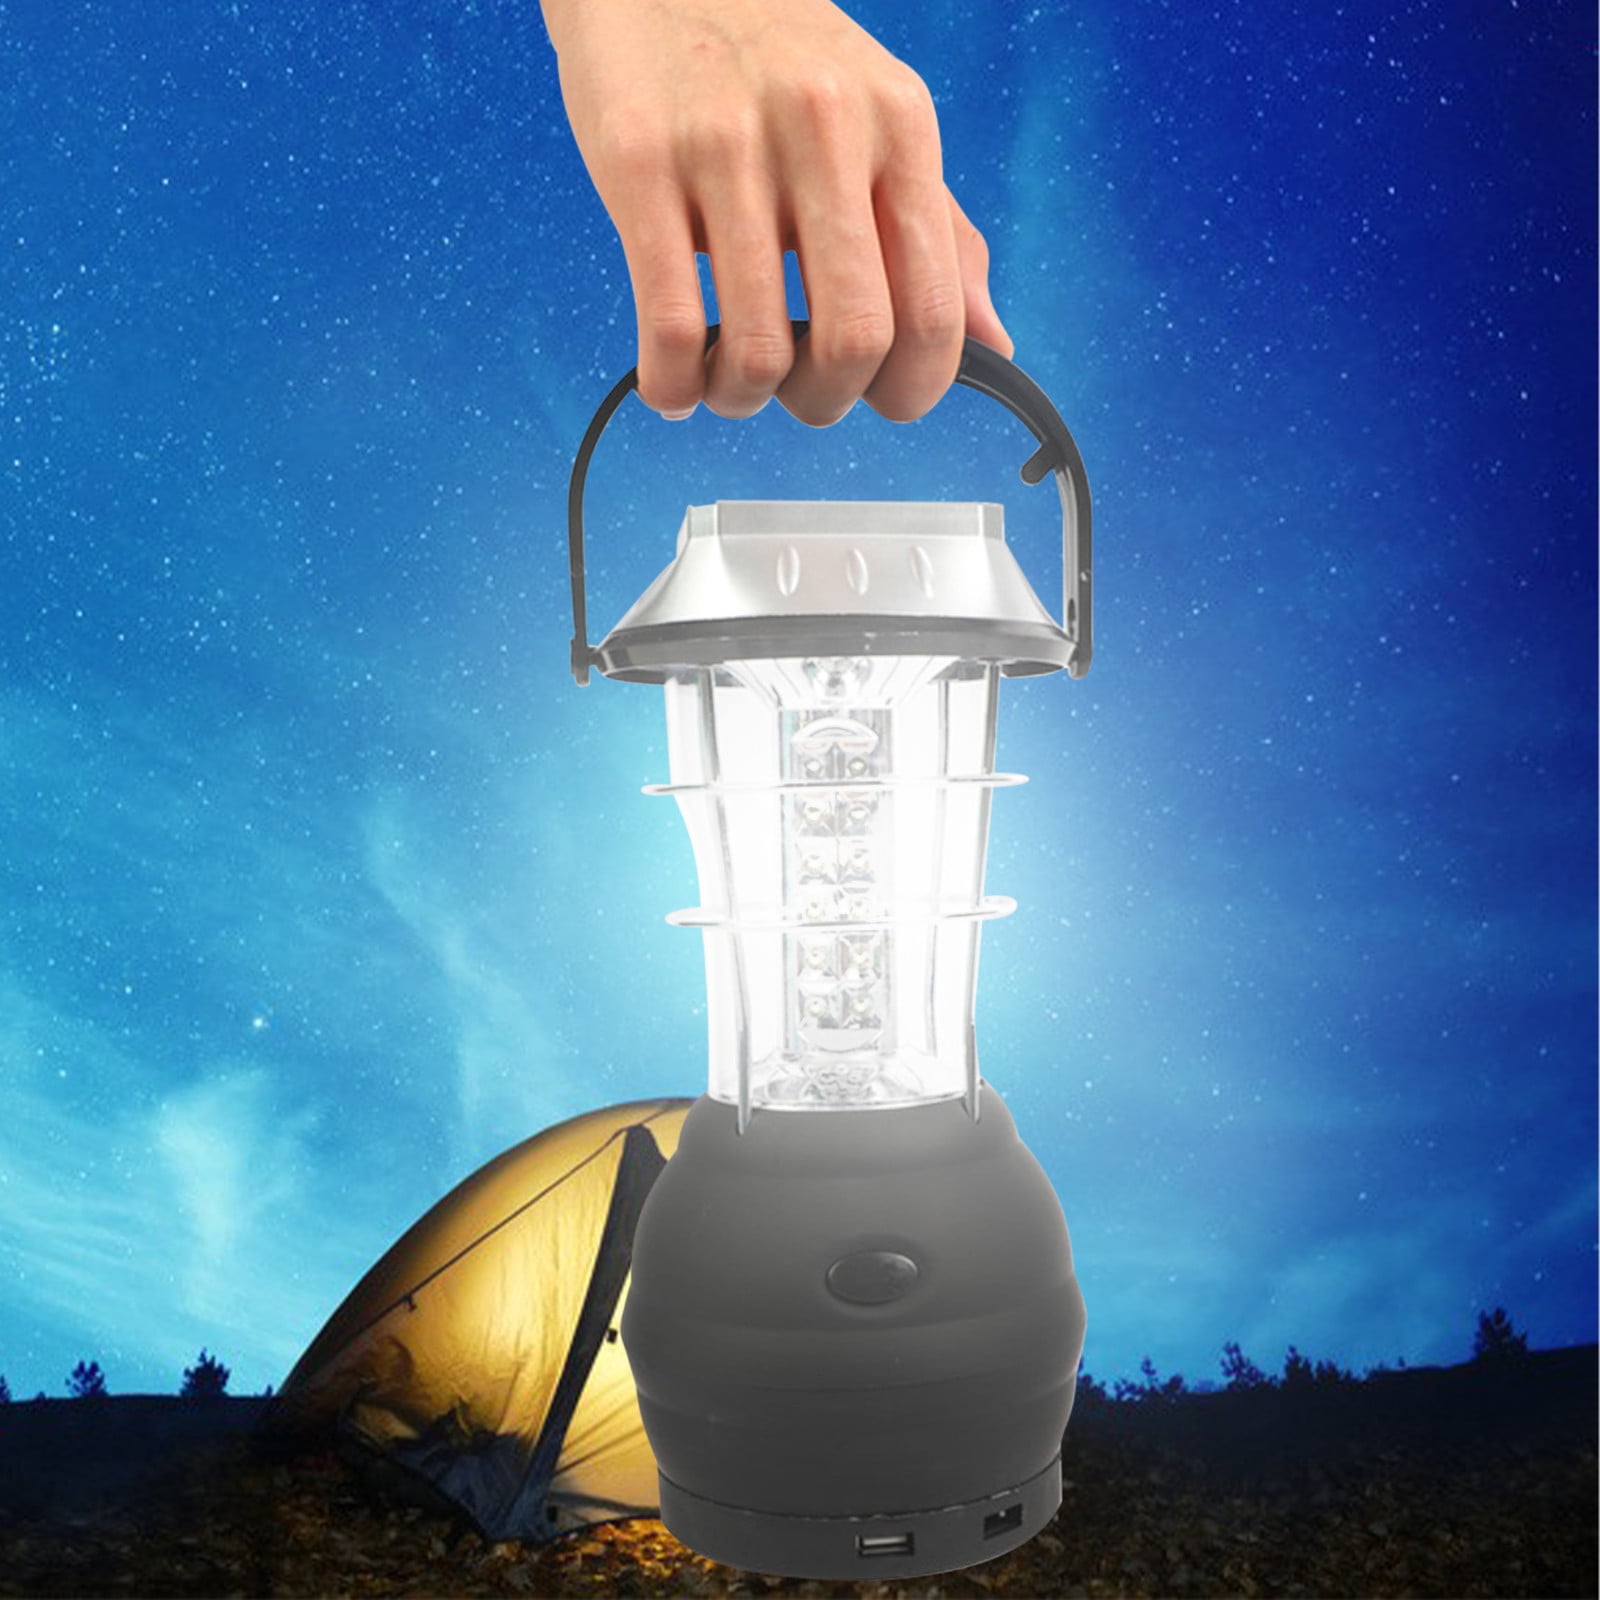 OAVQHLG3B Solar Camping Lantern Camping Gear USB Rechargable Hanging Waterproof  Camping Tent Lamp with Remote Control,Outdoor Camping Lamp Camping  Accessories for Camping,Hiking,Outage,Hurricane 